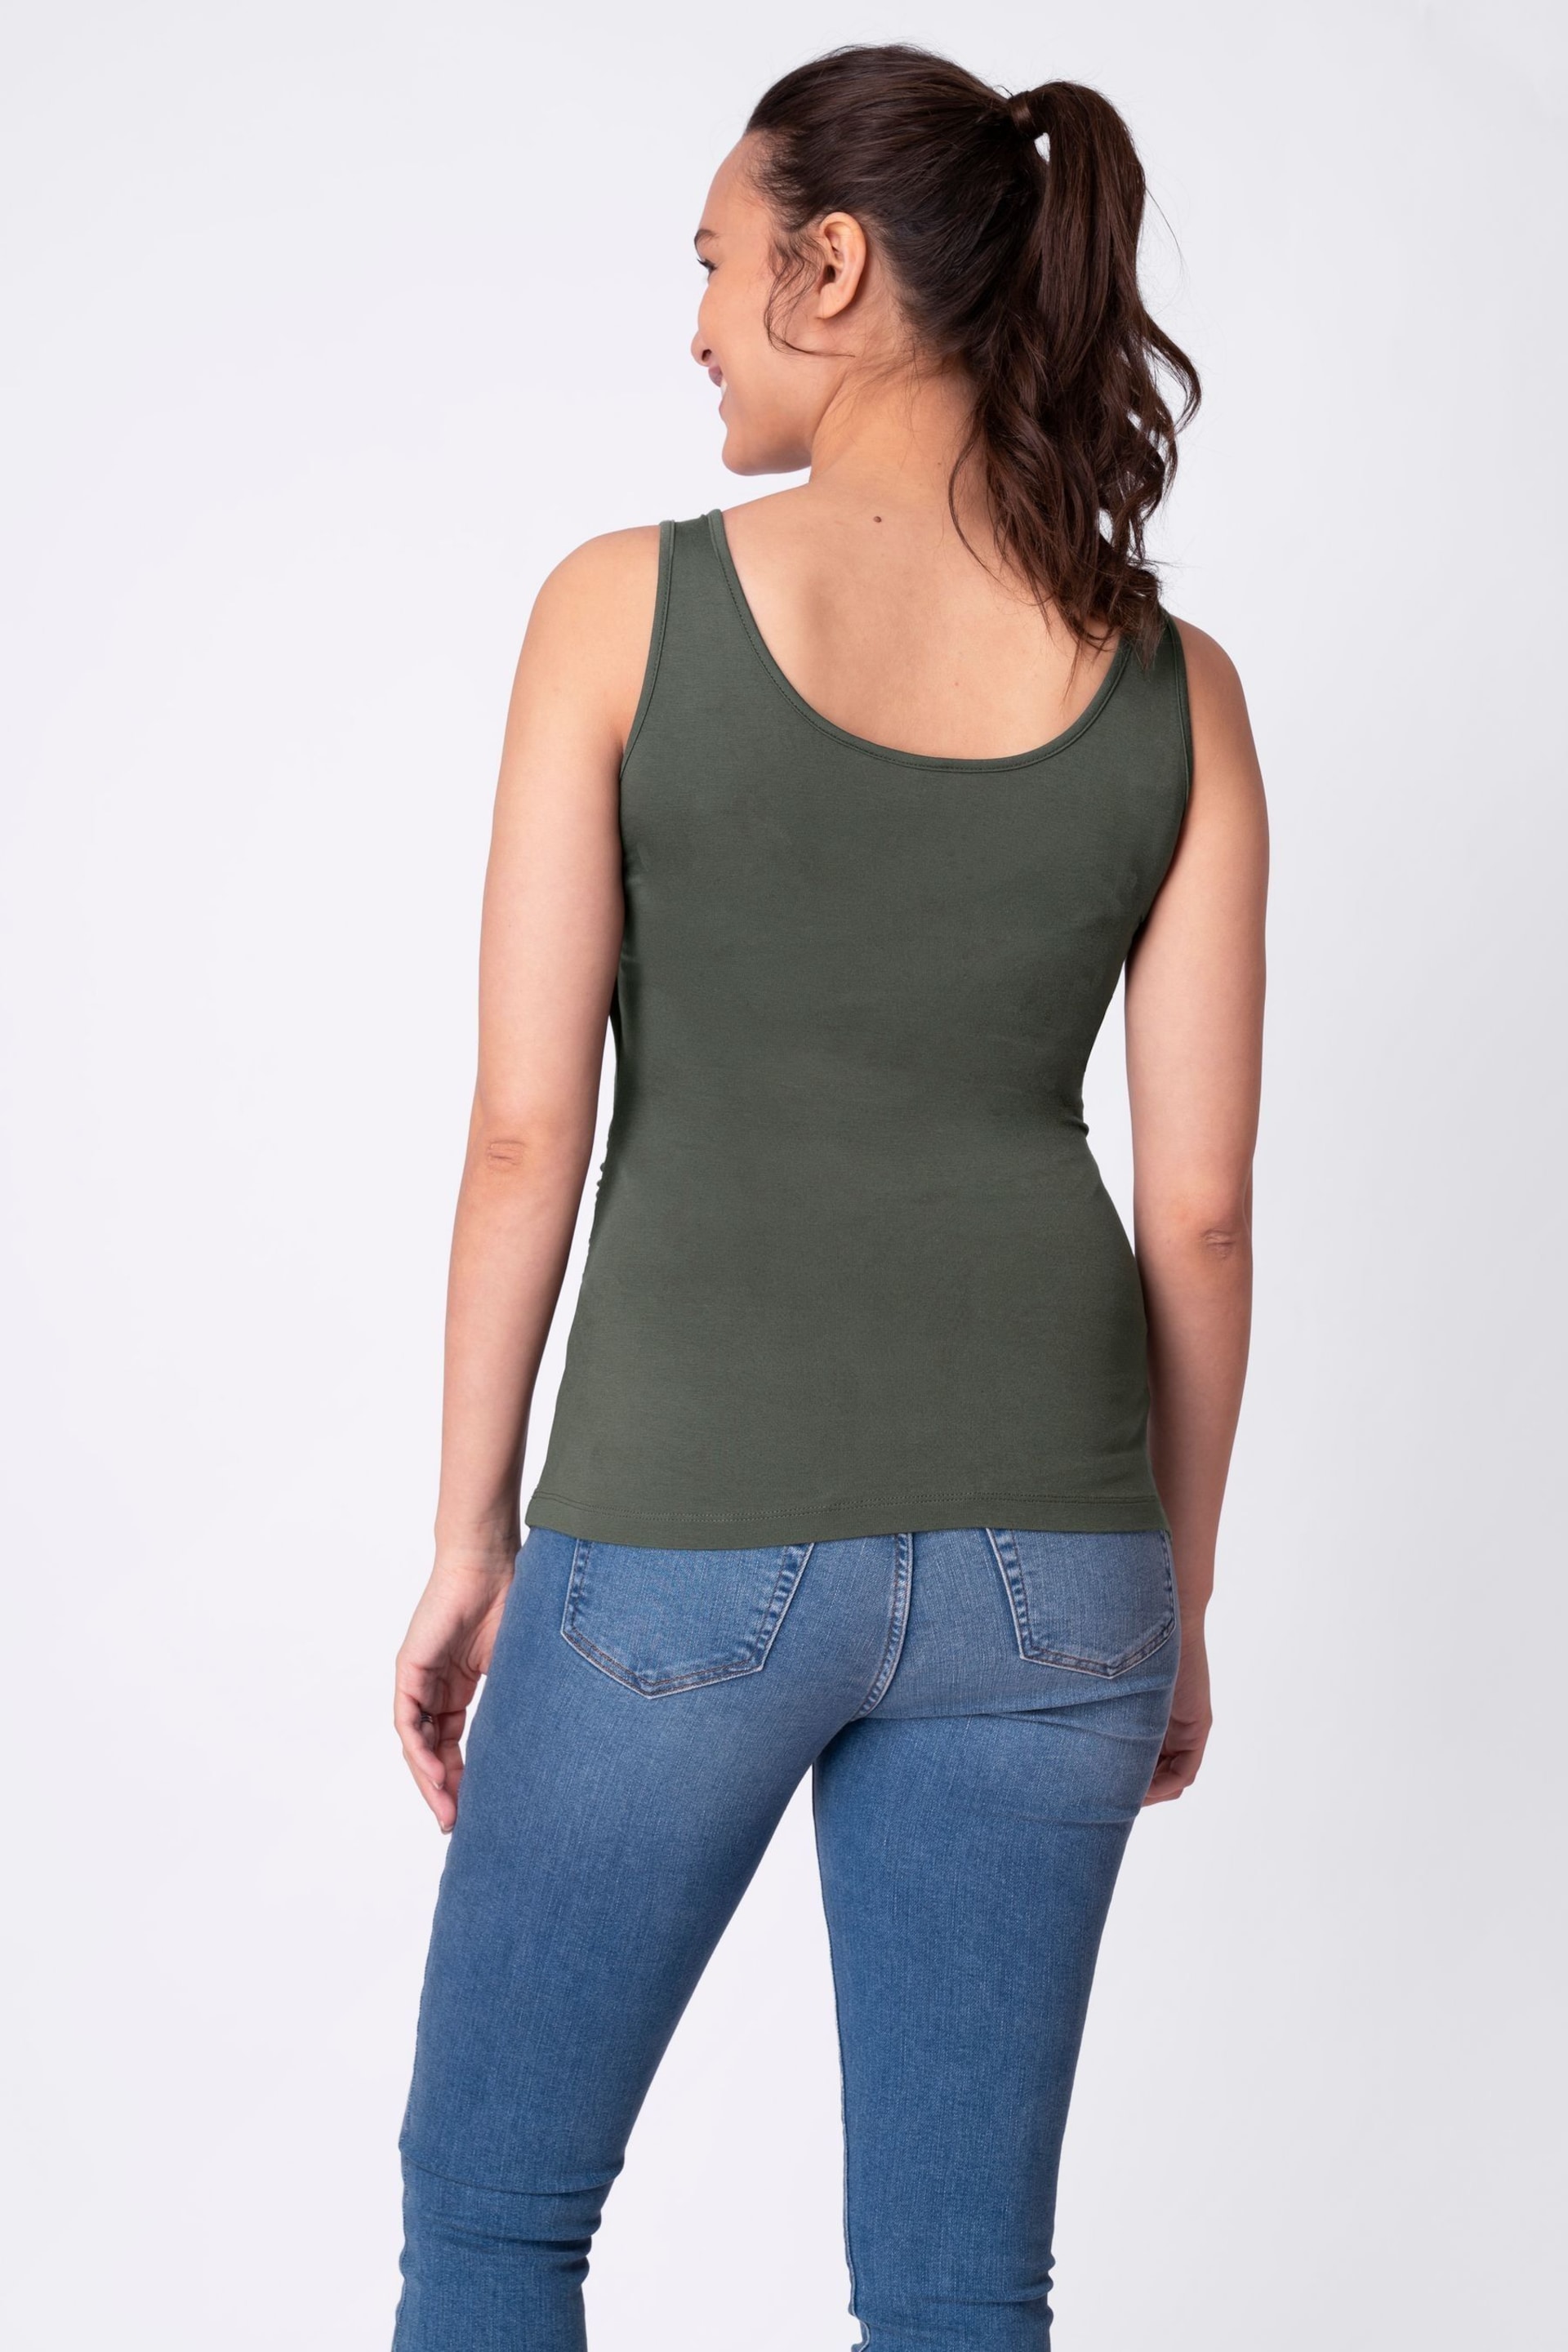 Seraphine Green Maternity And Nursing Tops Twin Pack - Image 2 of 6